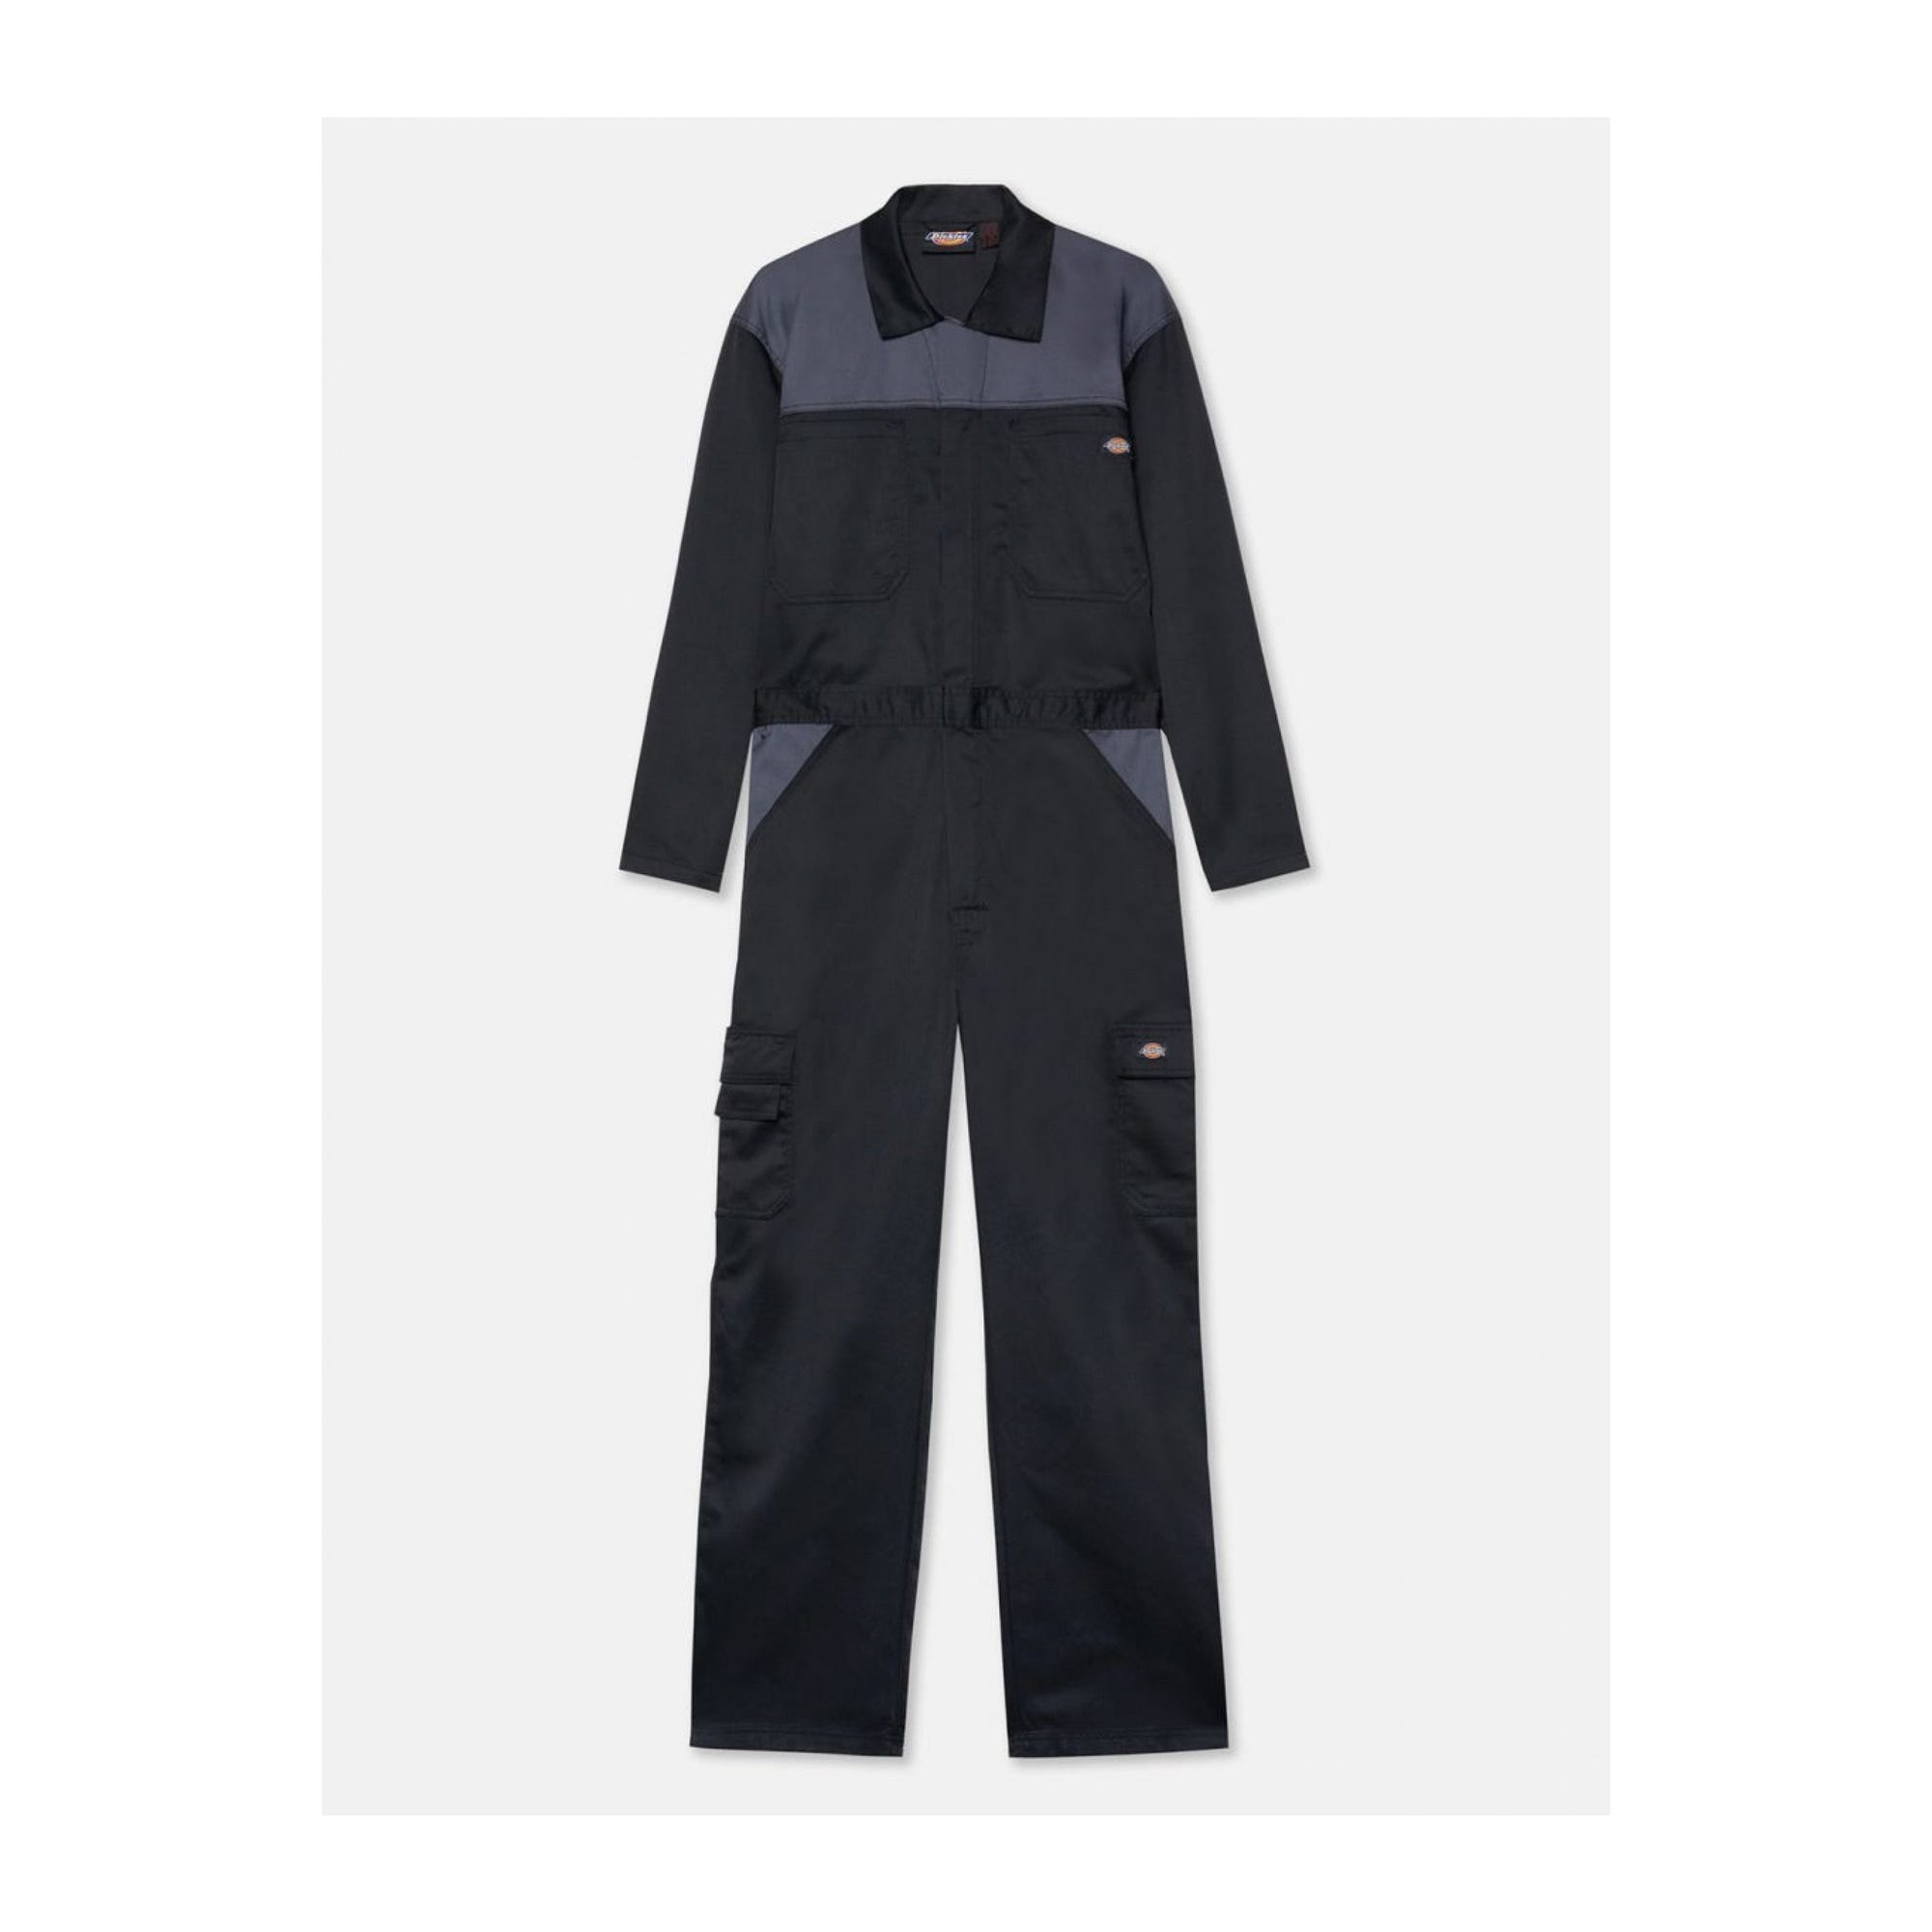 Combinaison Everyday Gris noir - Dickies - Taille S 5